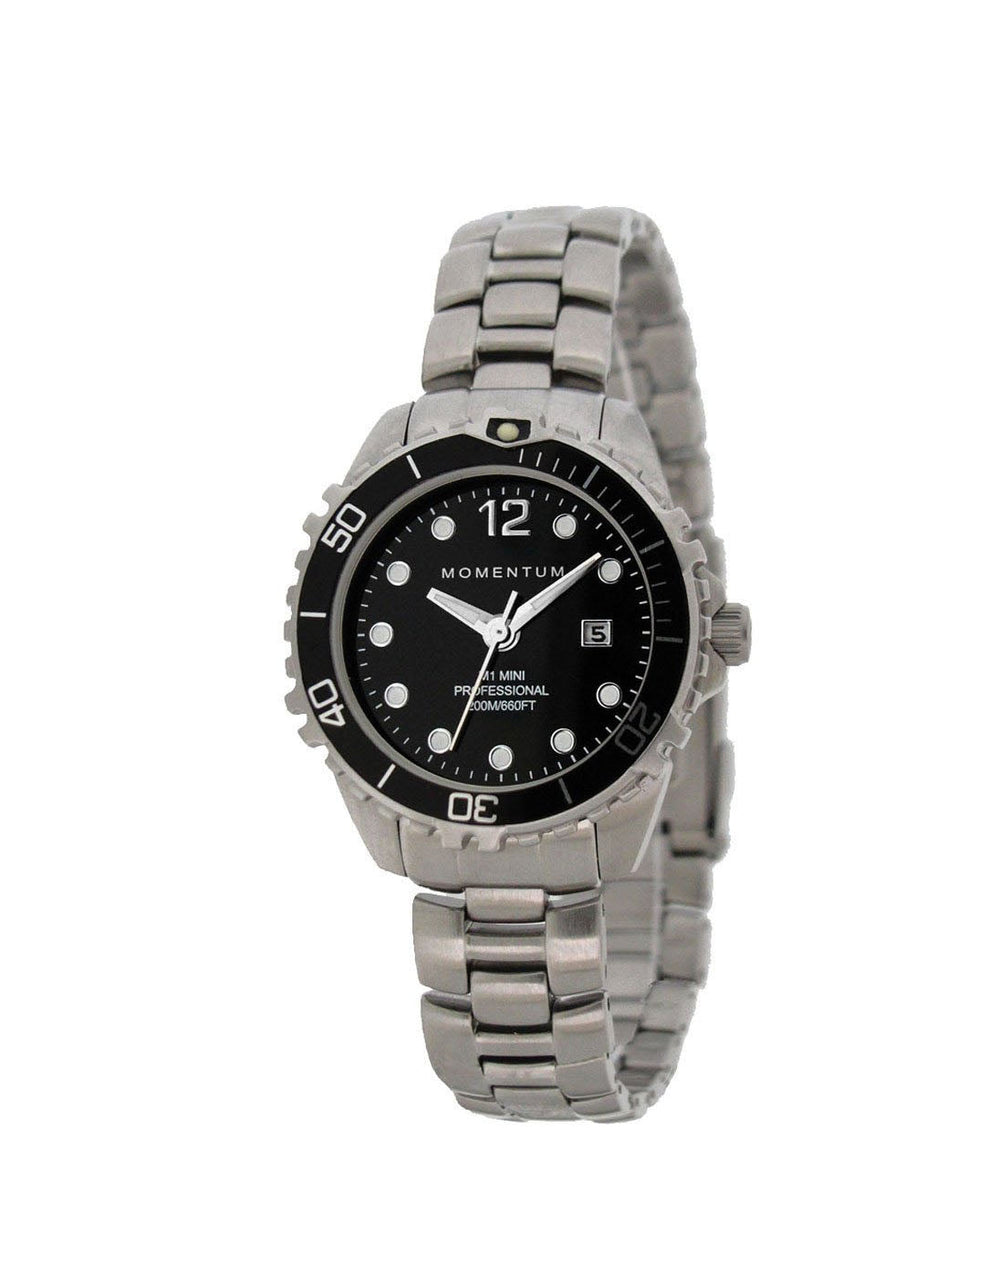 Momentum Momentum Mini Steel with Black Face - Oyster Diving